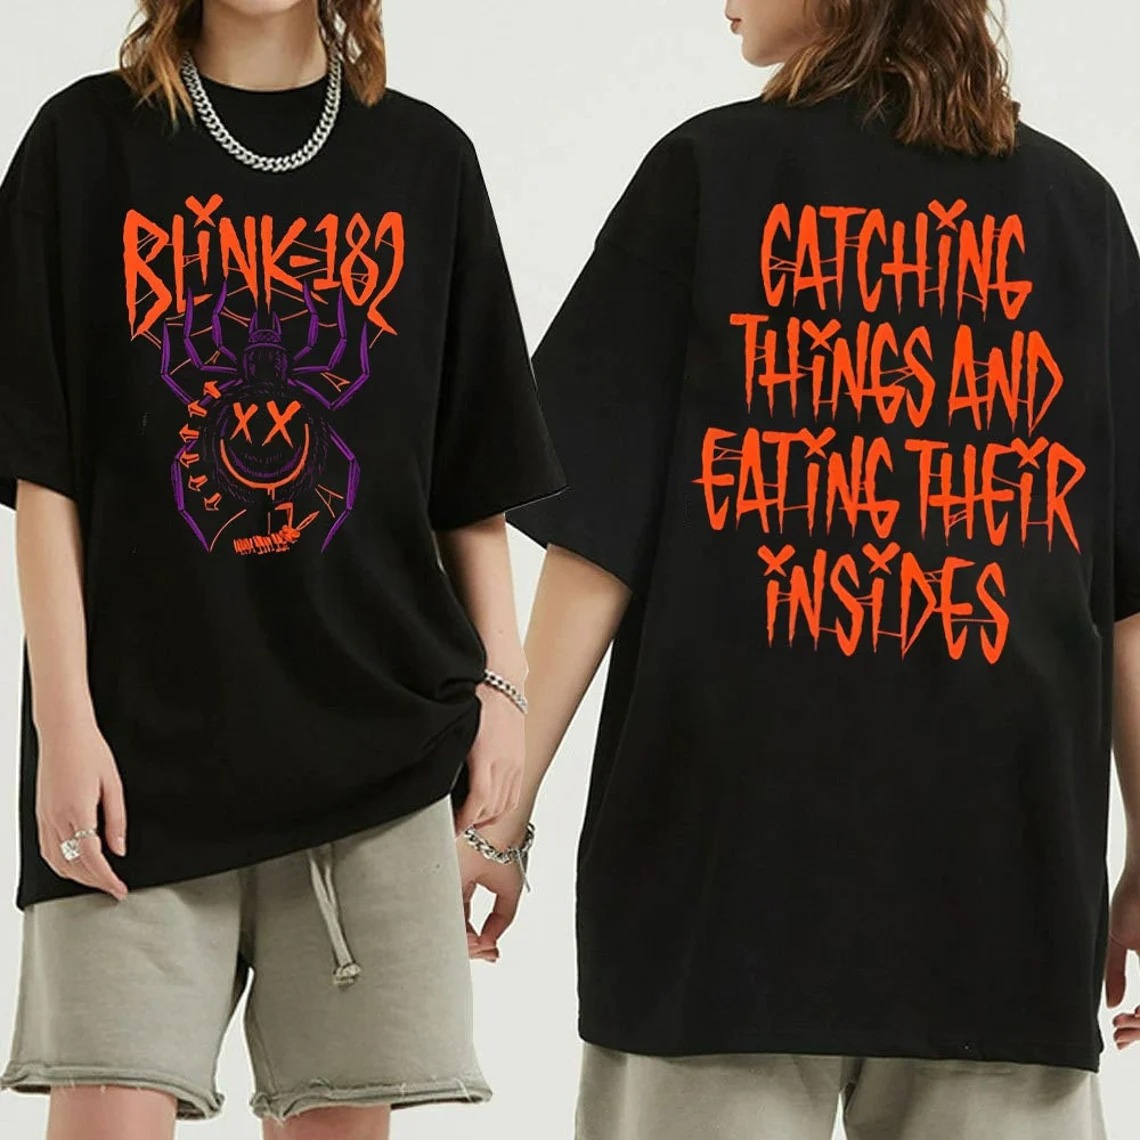 Blink-182 Halloween Catching Things And Eating Their Insides Unisex T-shirt